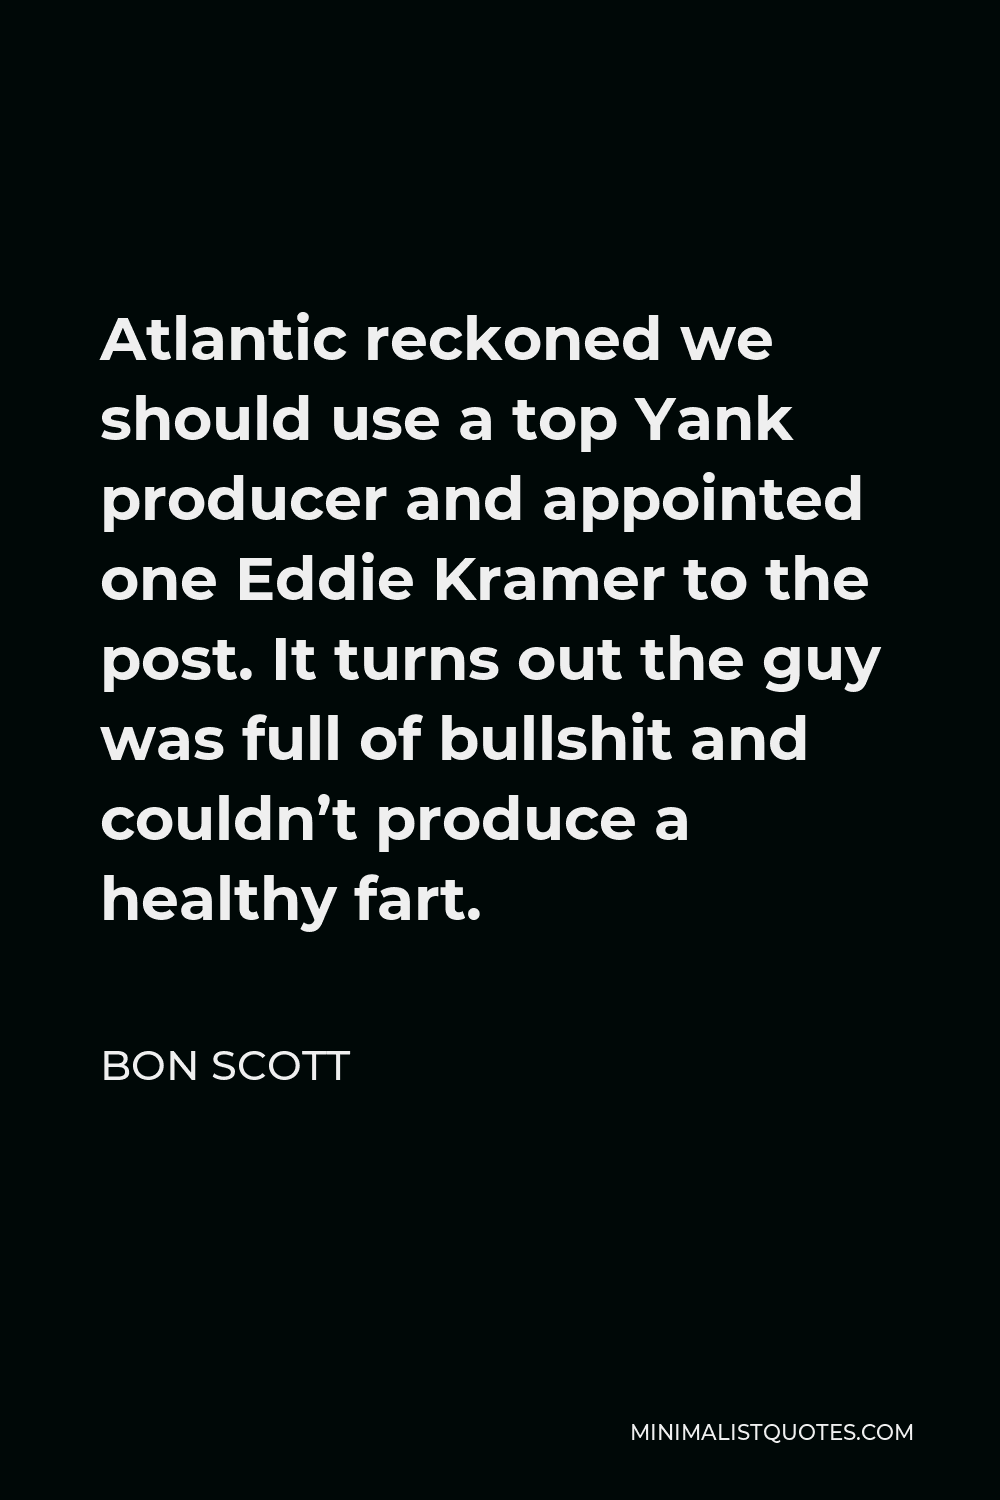 Bon Scott Quote - Atlantic reckoned we should use a top Yank producer and appointed one Eddie Kramer to the post. It turns out the guy was full of bullshit and couldn’t produce a healthy fart.